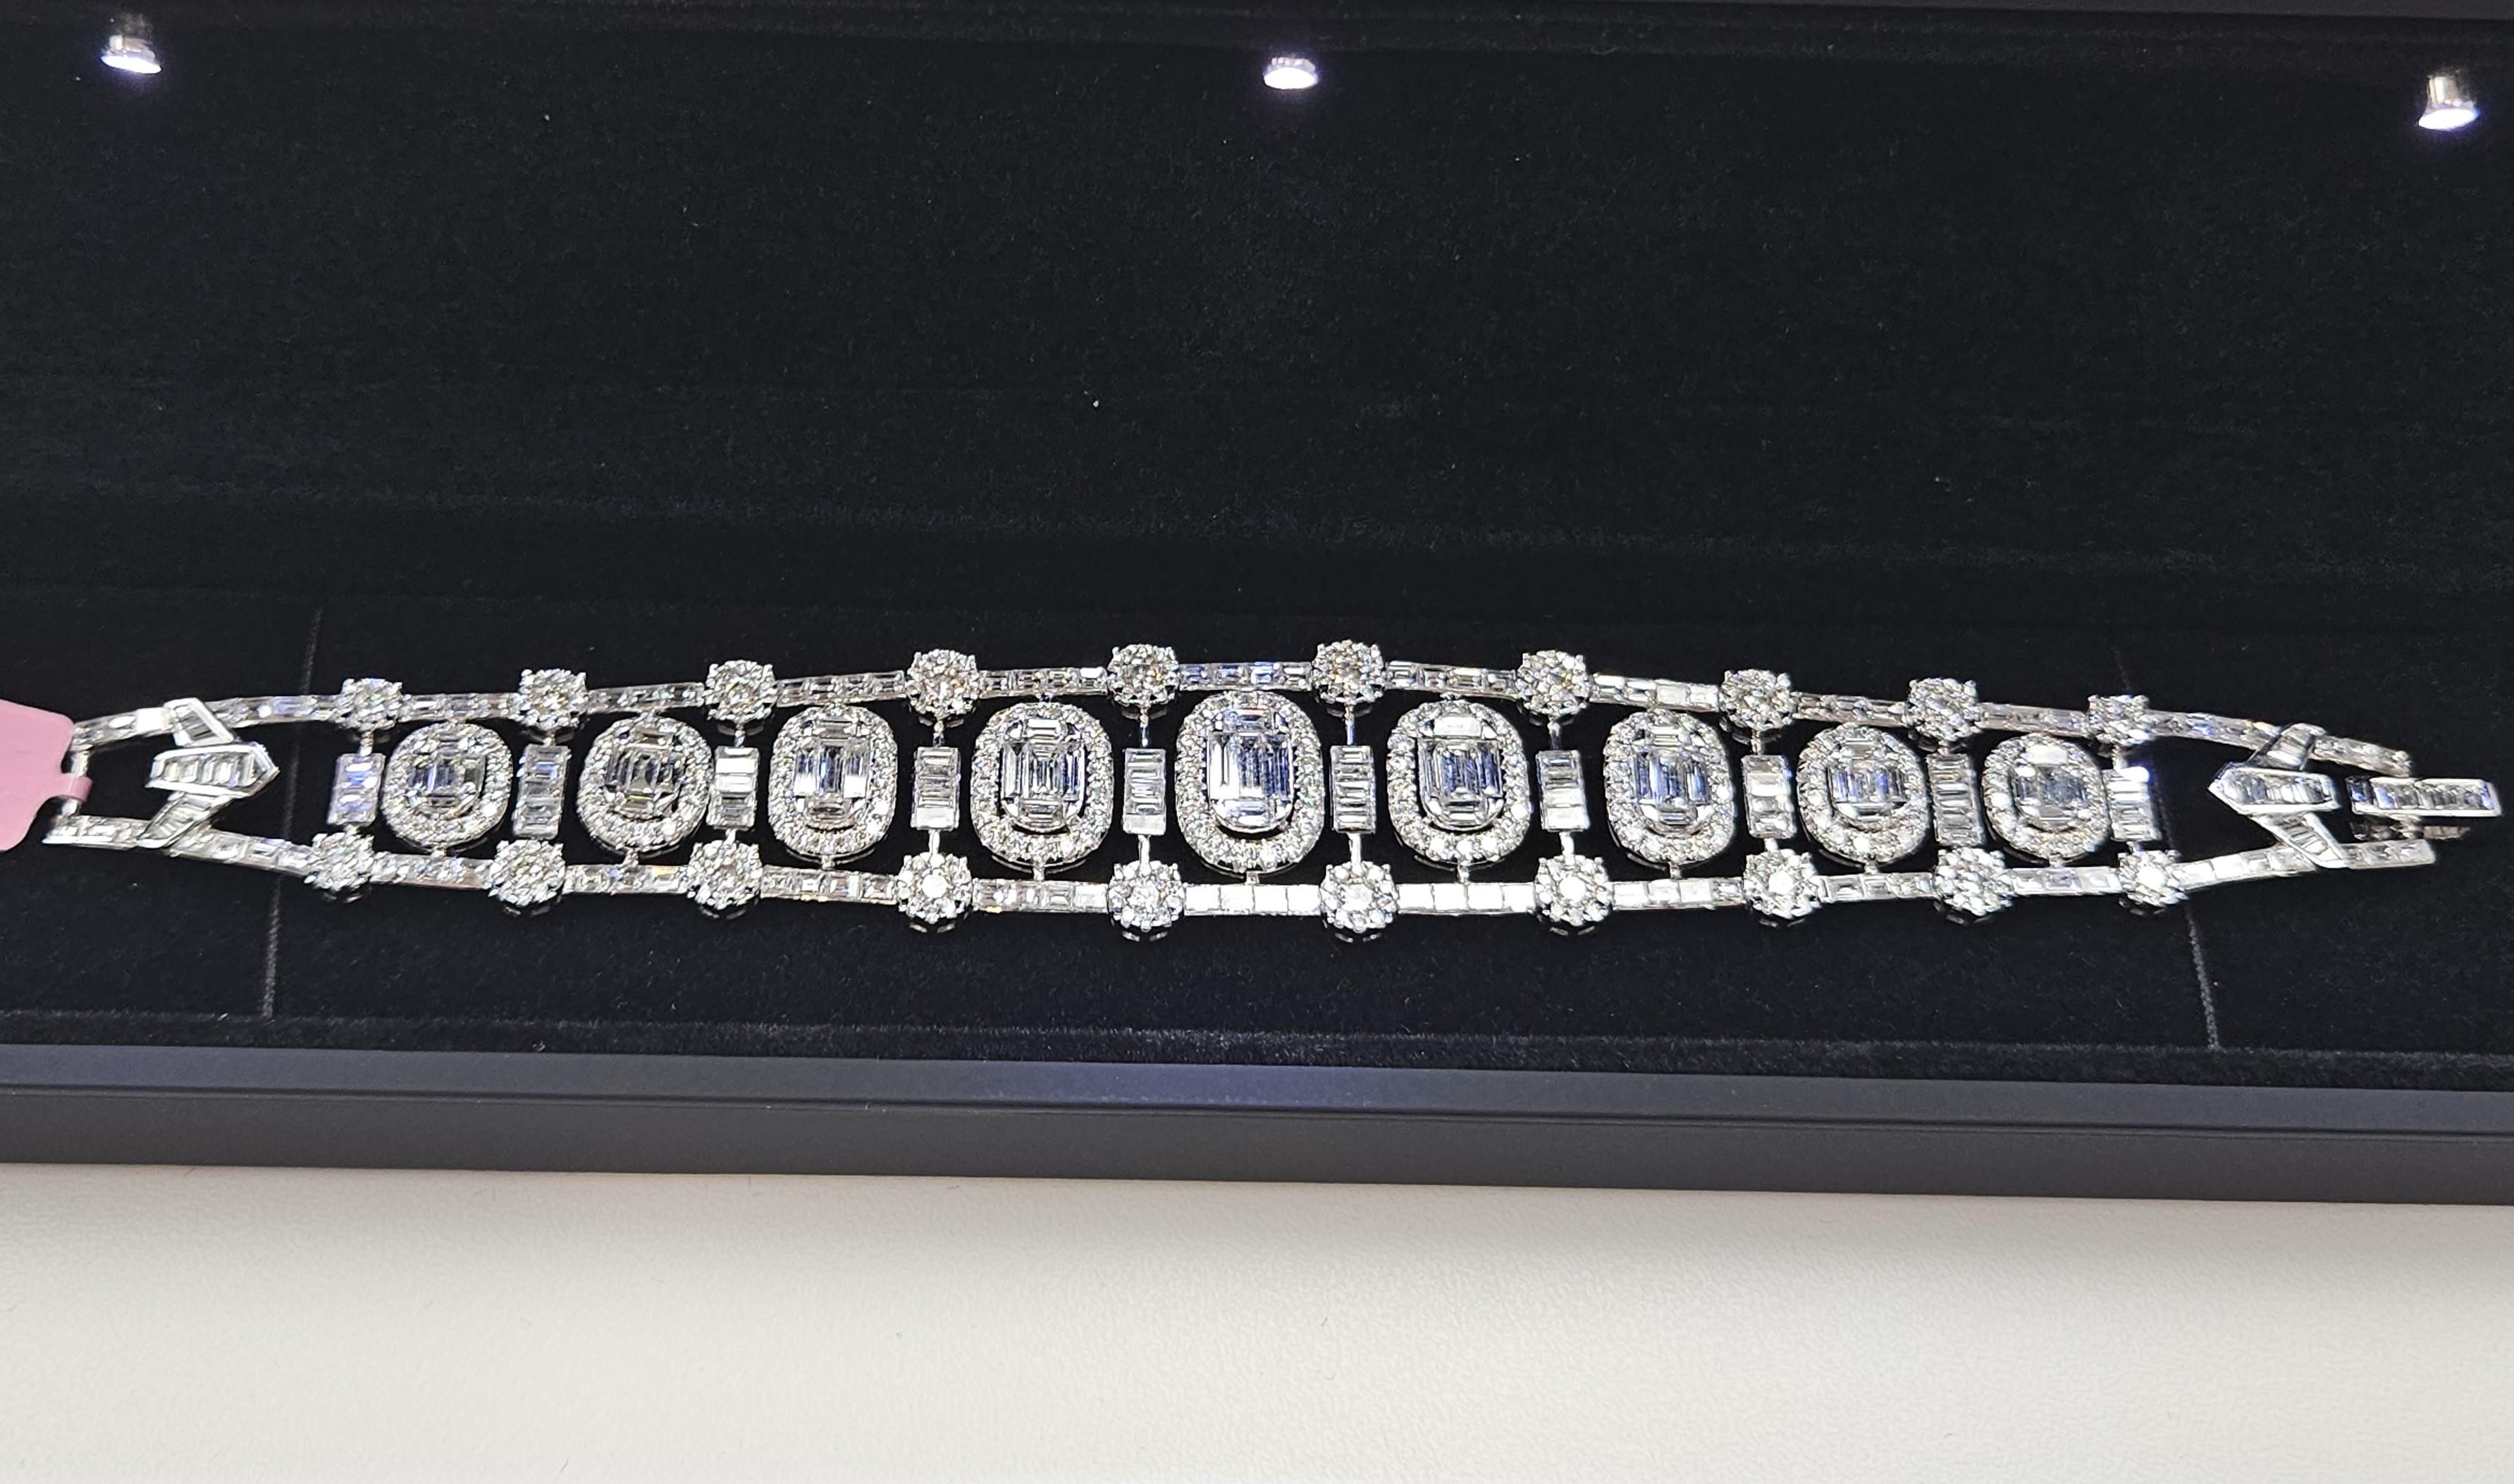 The Following Item we are offering is this Beautiful Rare Important 18KT White Gold Brilliant White Diamond Fancy Elaborate Tennis Bracelet. Bracelet is comprised of approx 17CTS of Magnificent Rare Gorgeous Rare Fancy Glittering Diamonds with Large